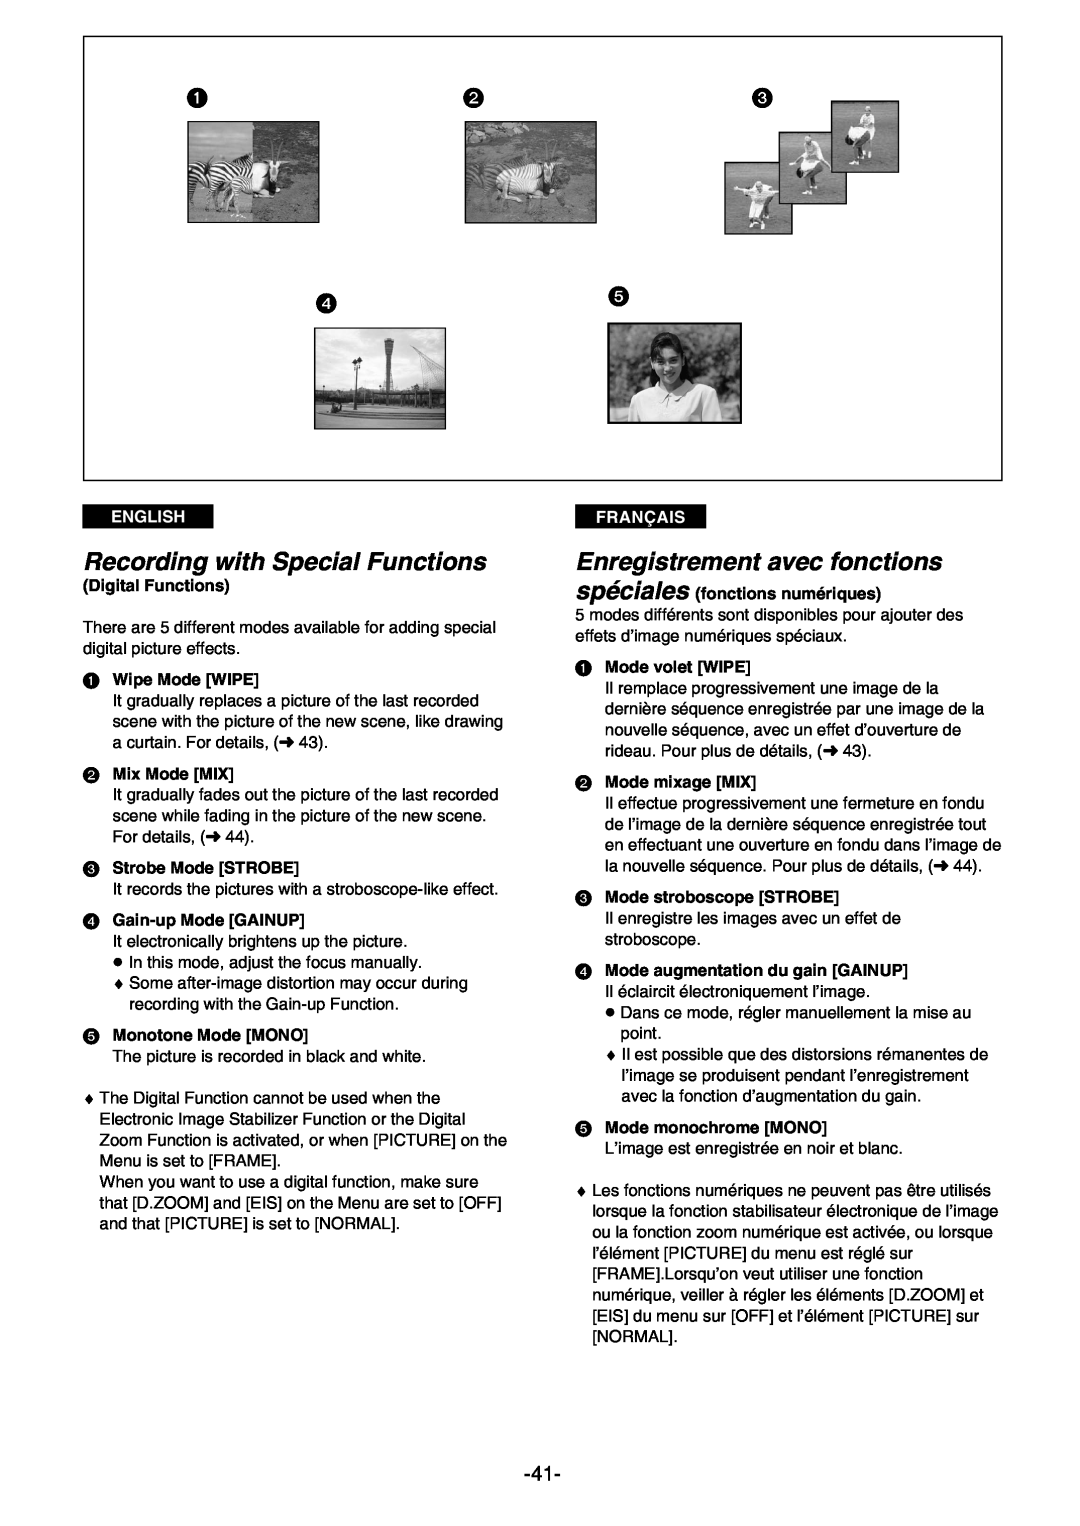 Panasonic AG- DVC 15P manual Recording with Special Functions, Enregistrement avec fonctions, English, Digital Functions 